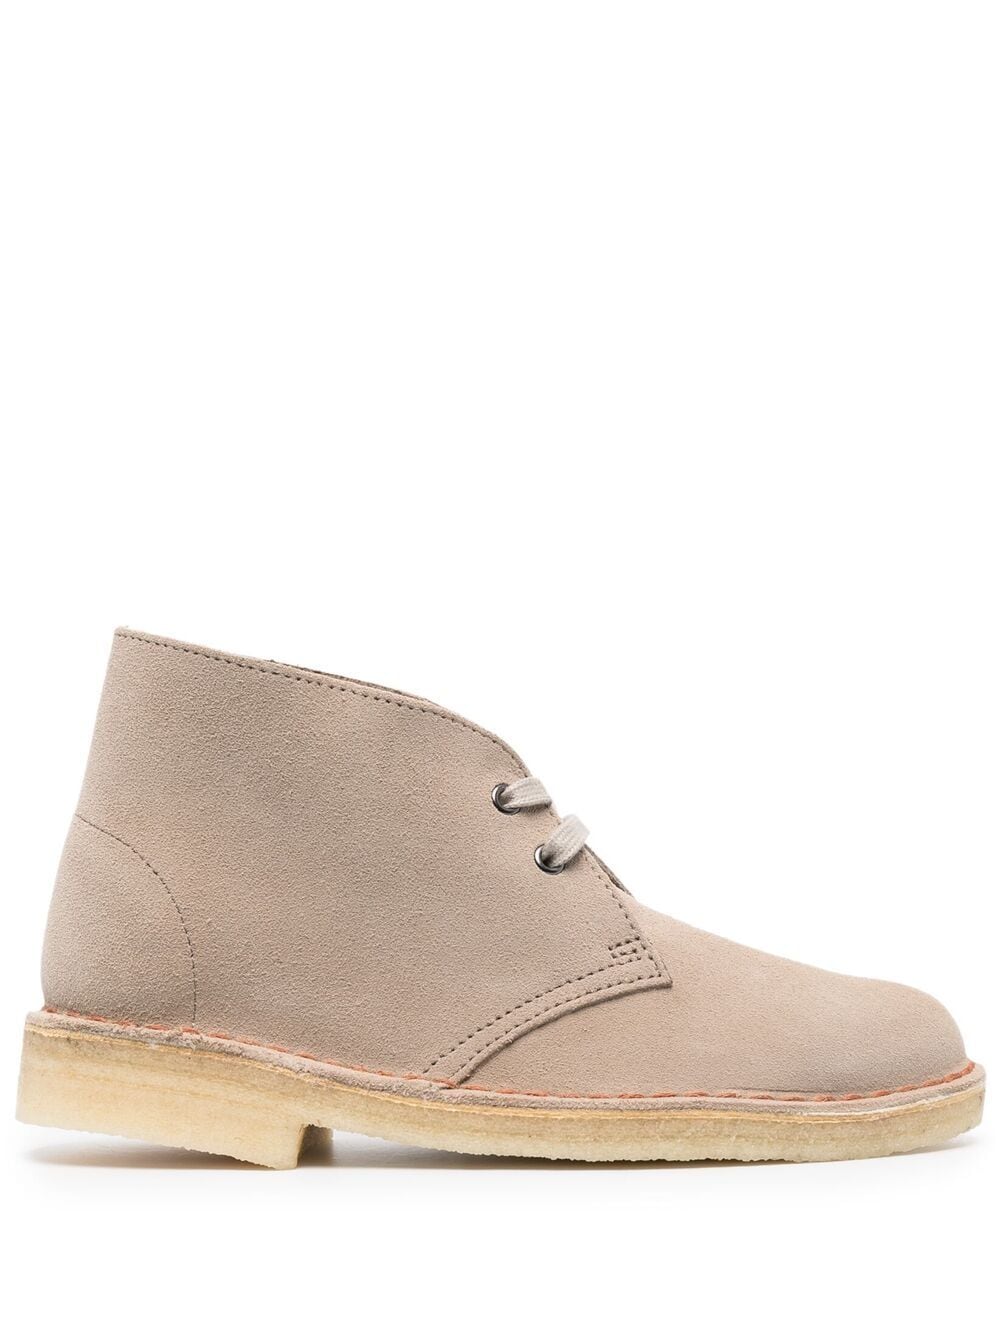 Desert Boot Leather Ankle Boots дамски обувки Clarks 844206901_36